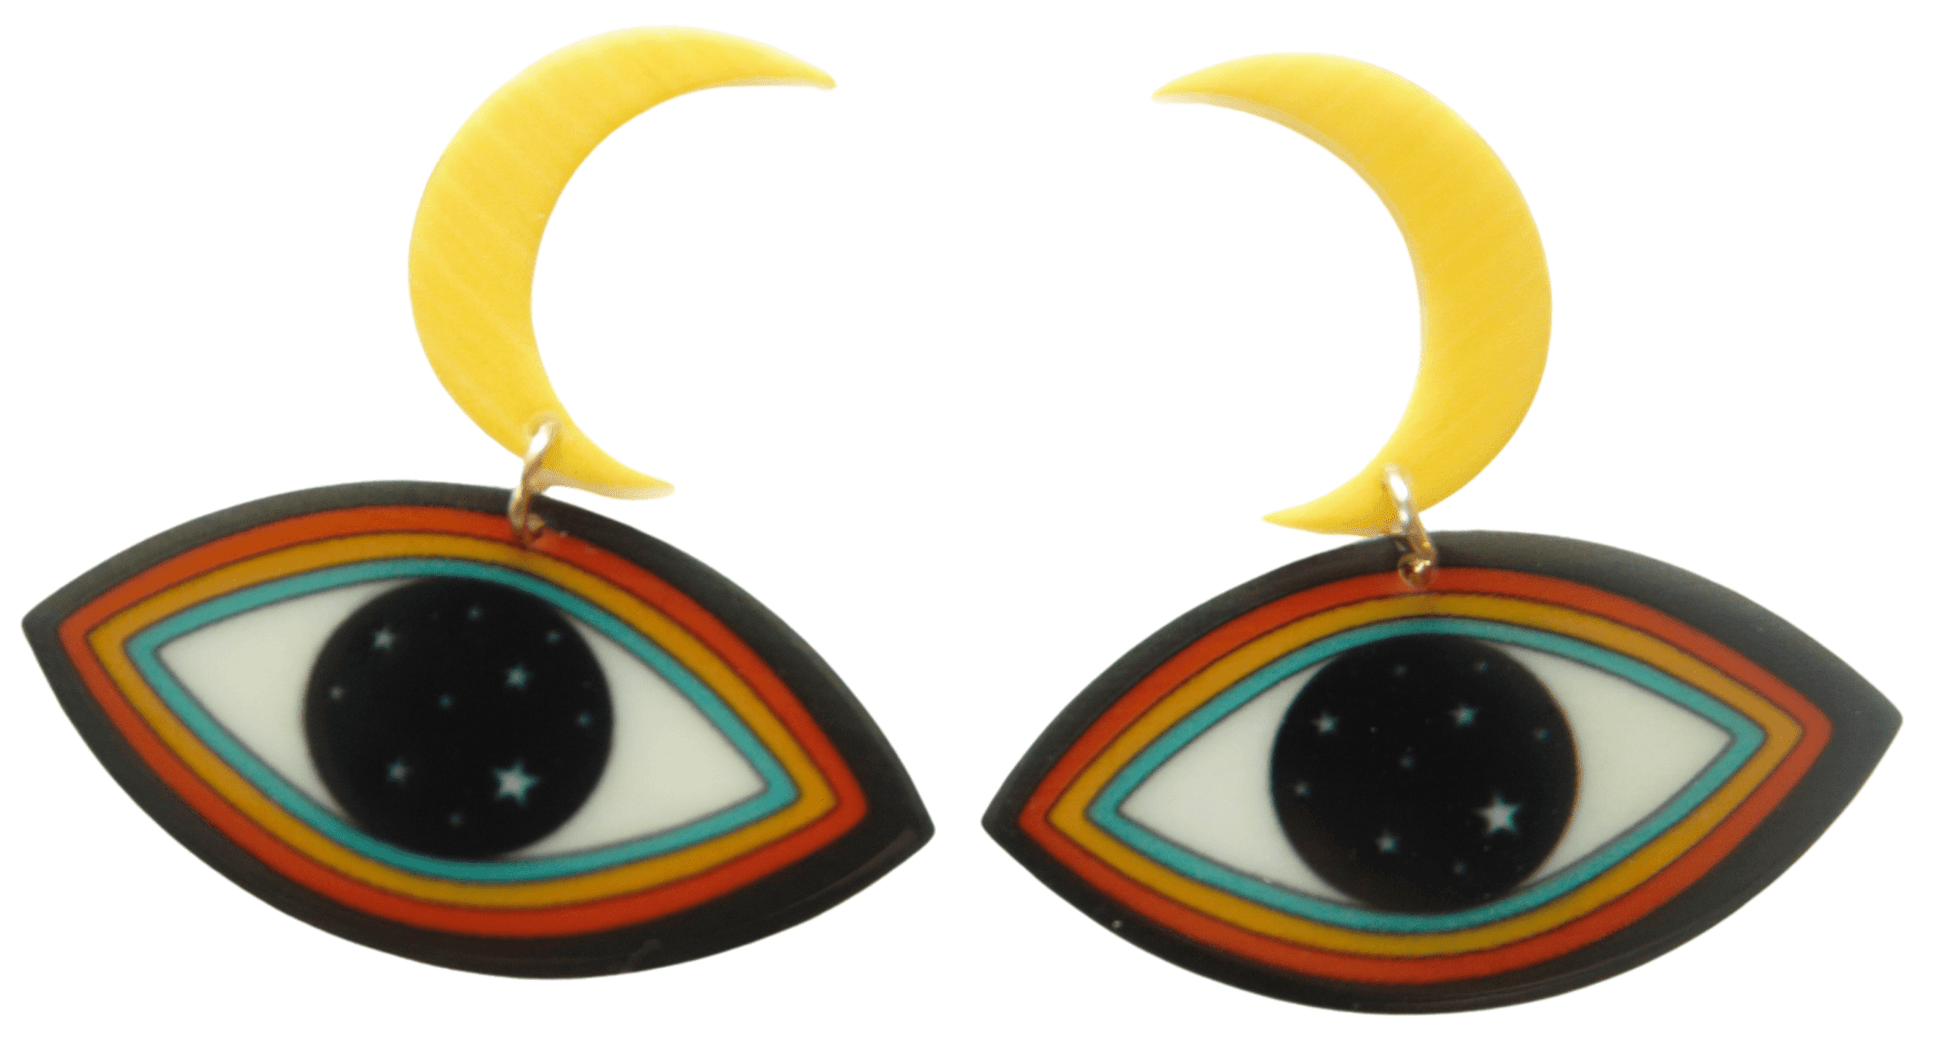 70s Starry Eyed Moon and Skies Earrings Groovy Girl - Relic828